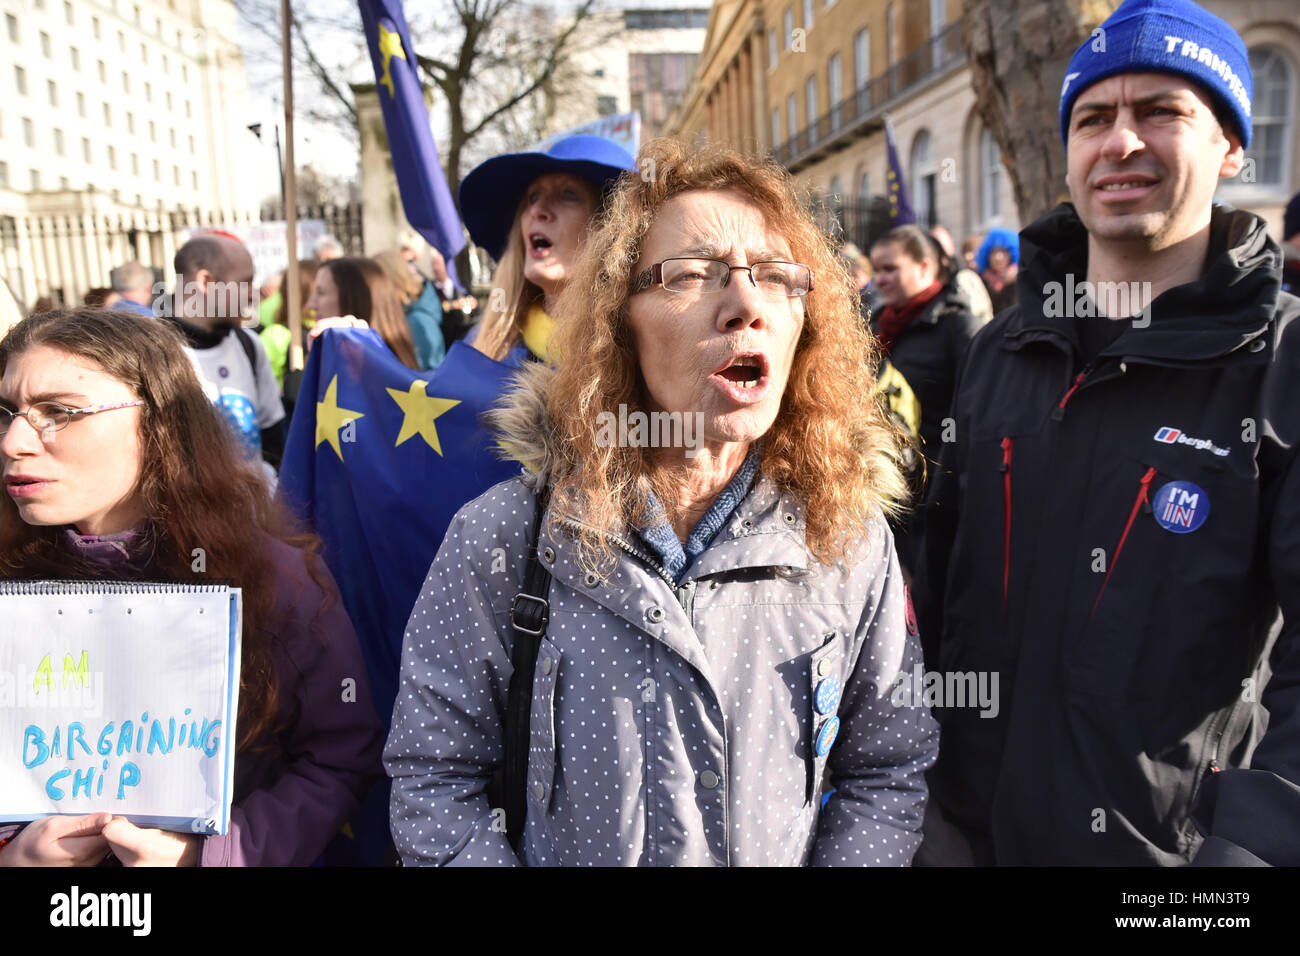 Downing Street, London, UK. 4th February 2017. Protest to delay Article 50 and Brexit opposite Downing Street. Credit: Matthew Chattle/Alamy Live News Stock Photo